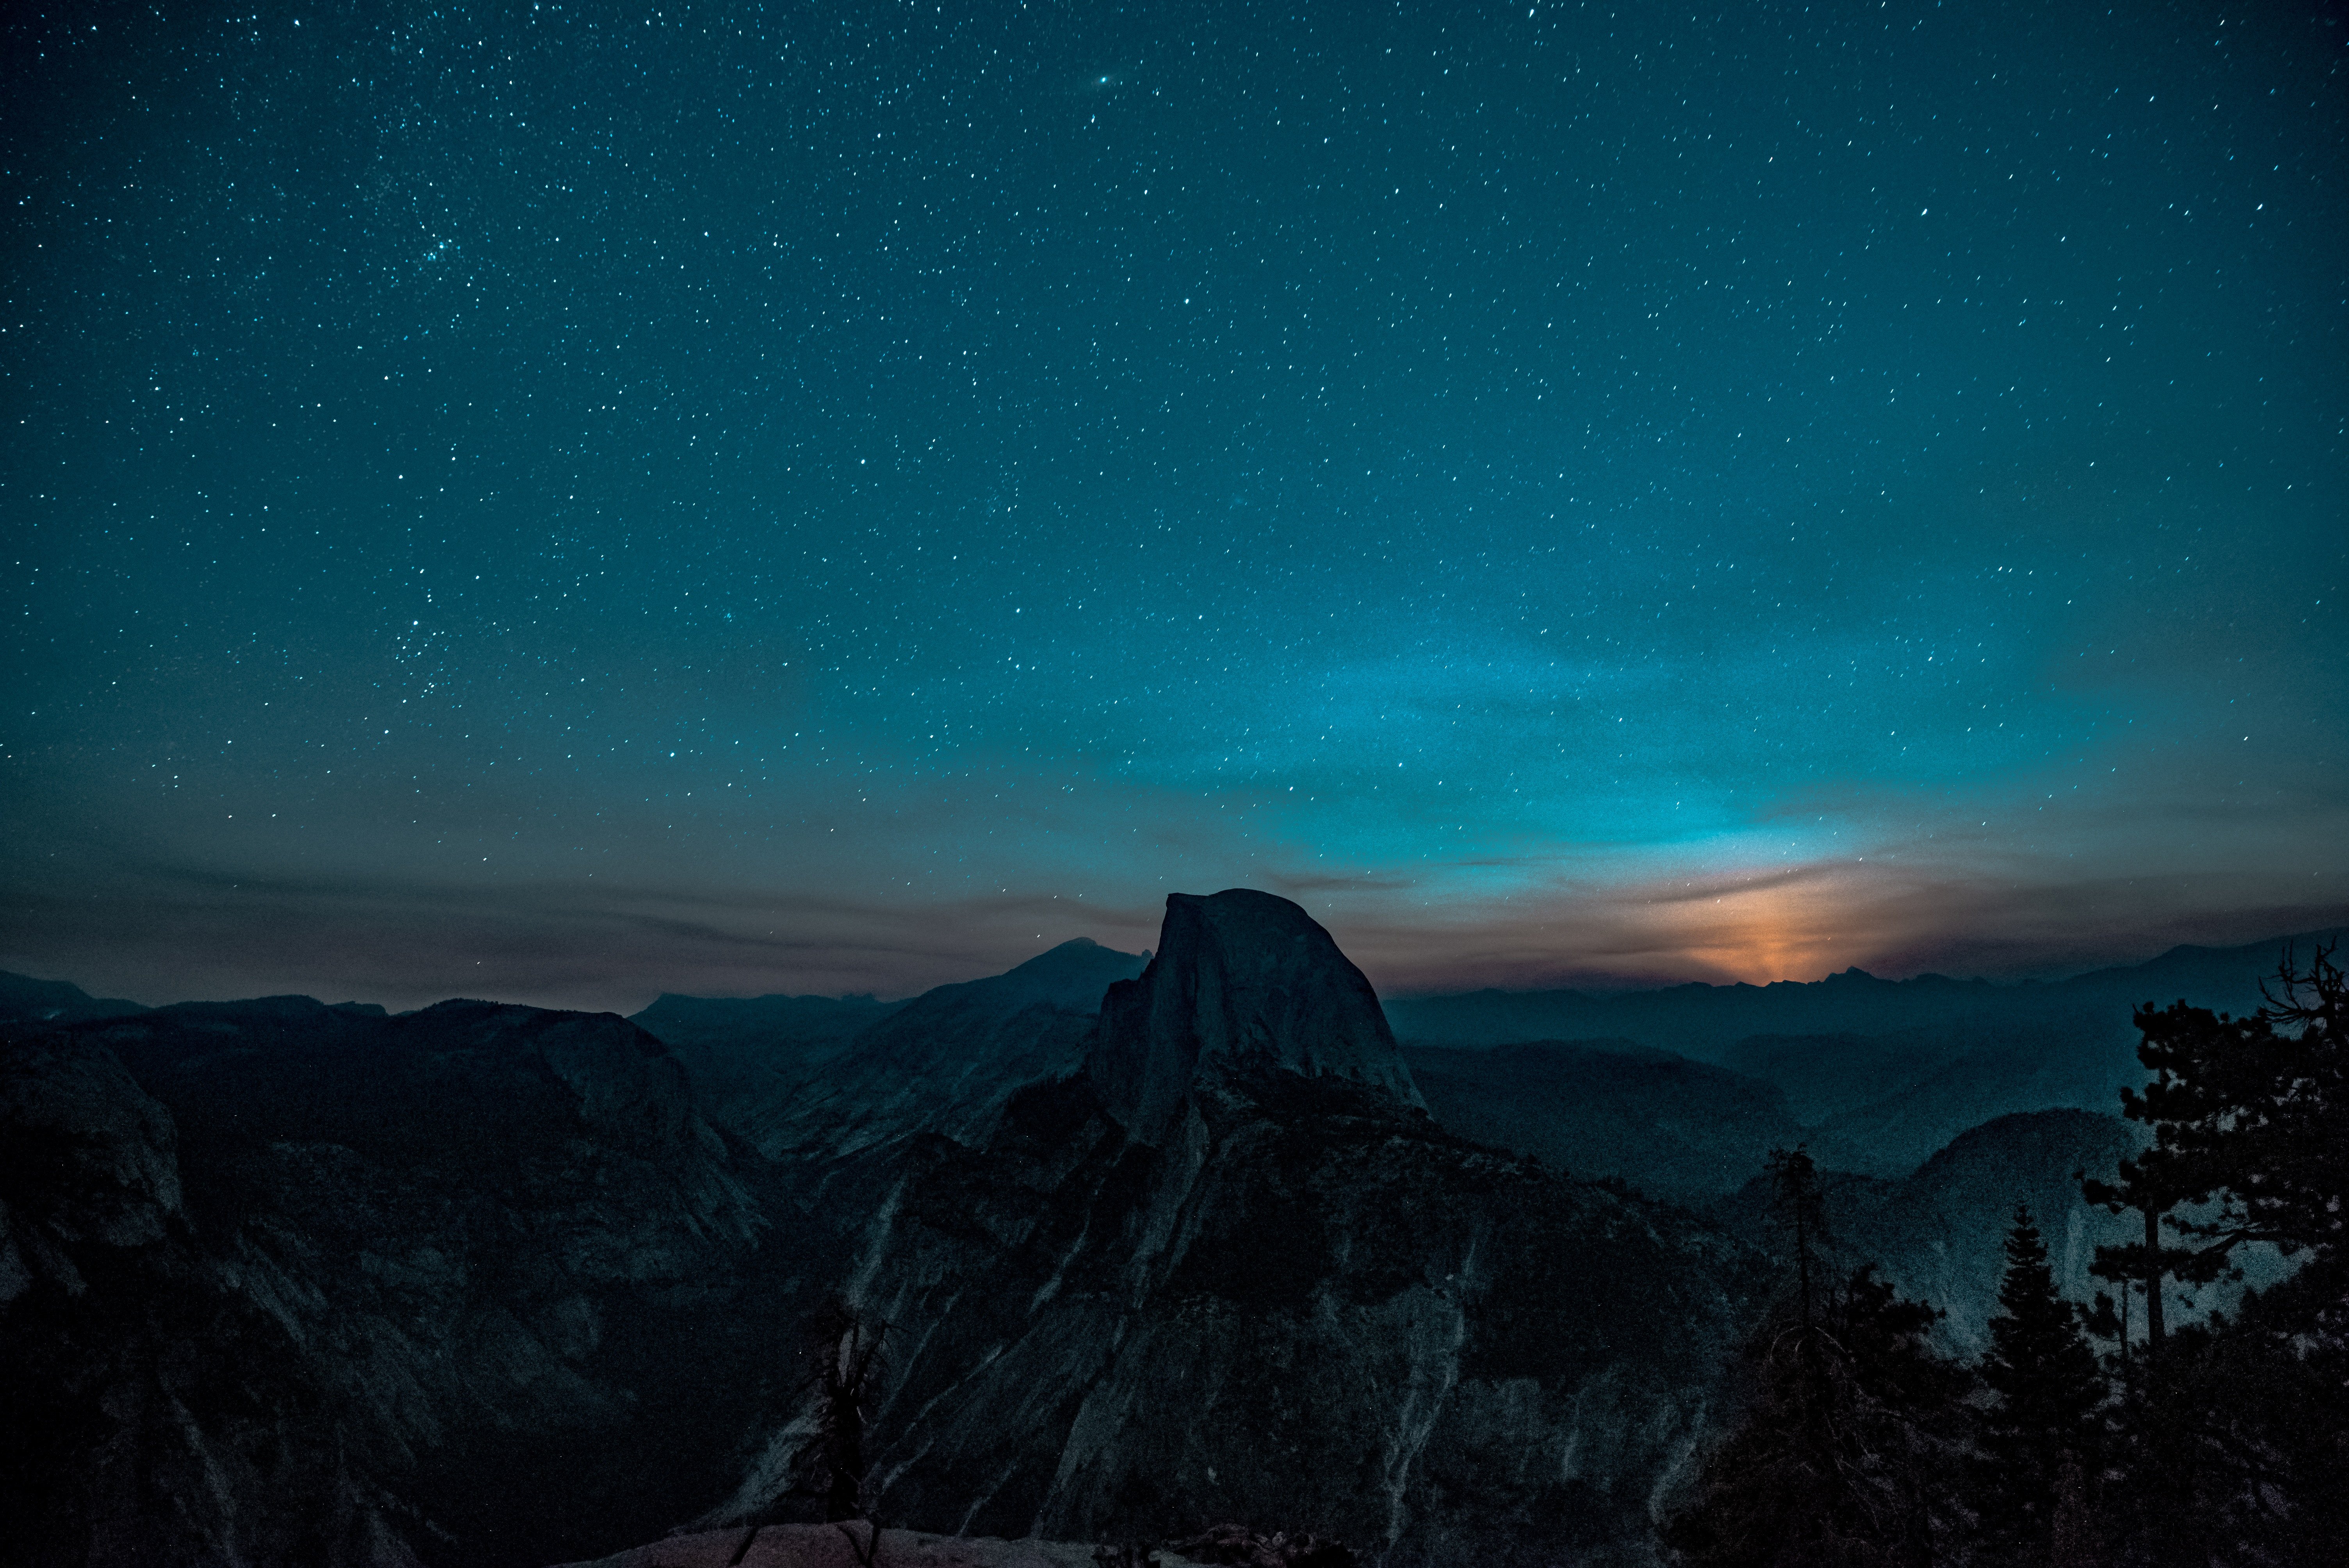 Yosemite 4k Wallpapers For Your Desktop Or Mobile Screen Free And Easy To Download